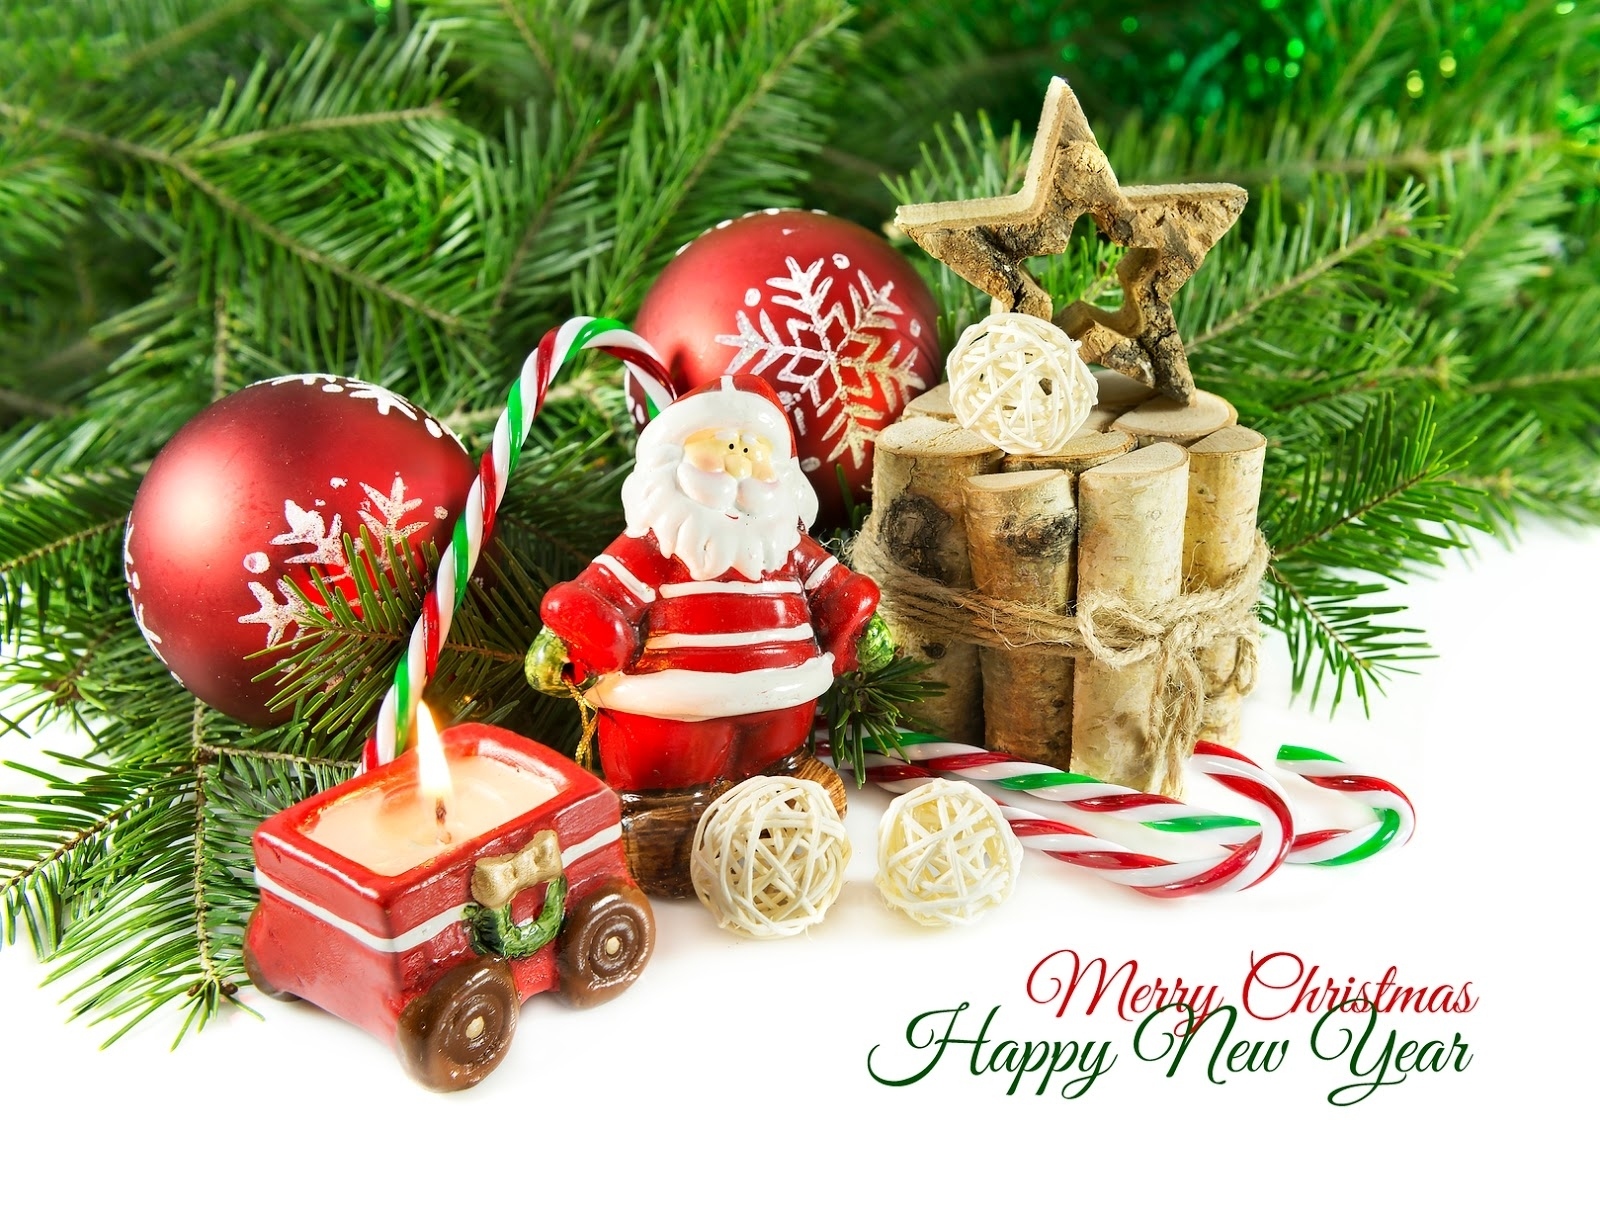 santa claus, holiday, new year, candle, christmas, decoration, happy new year, merry christmas, star